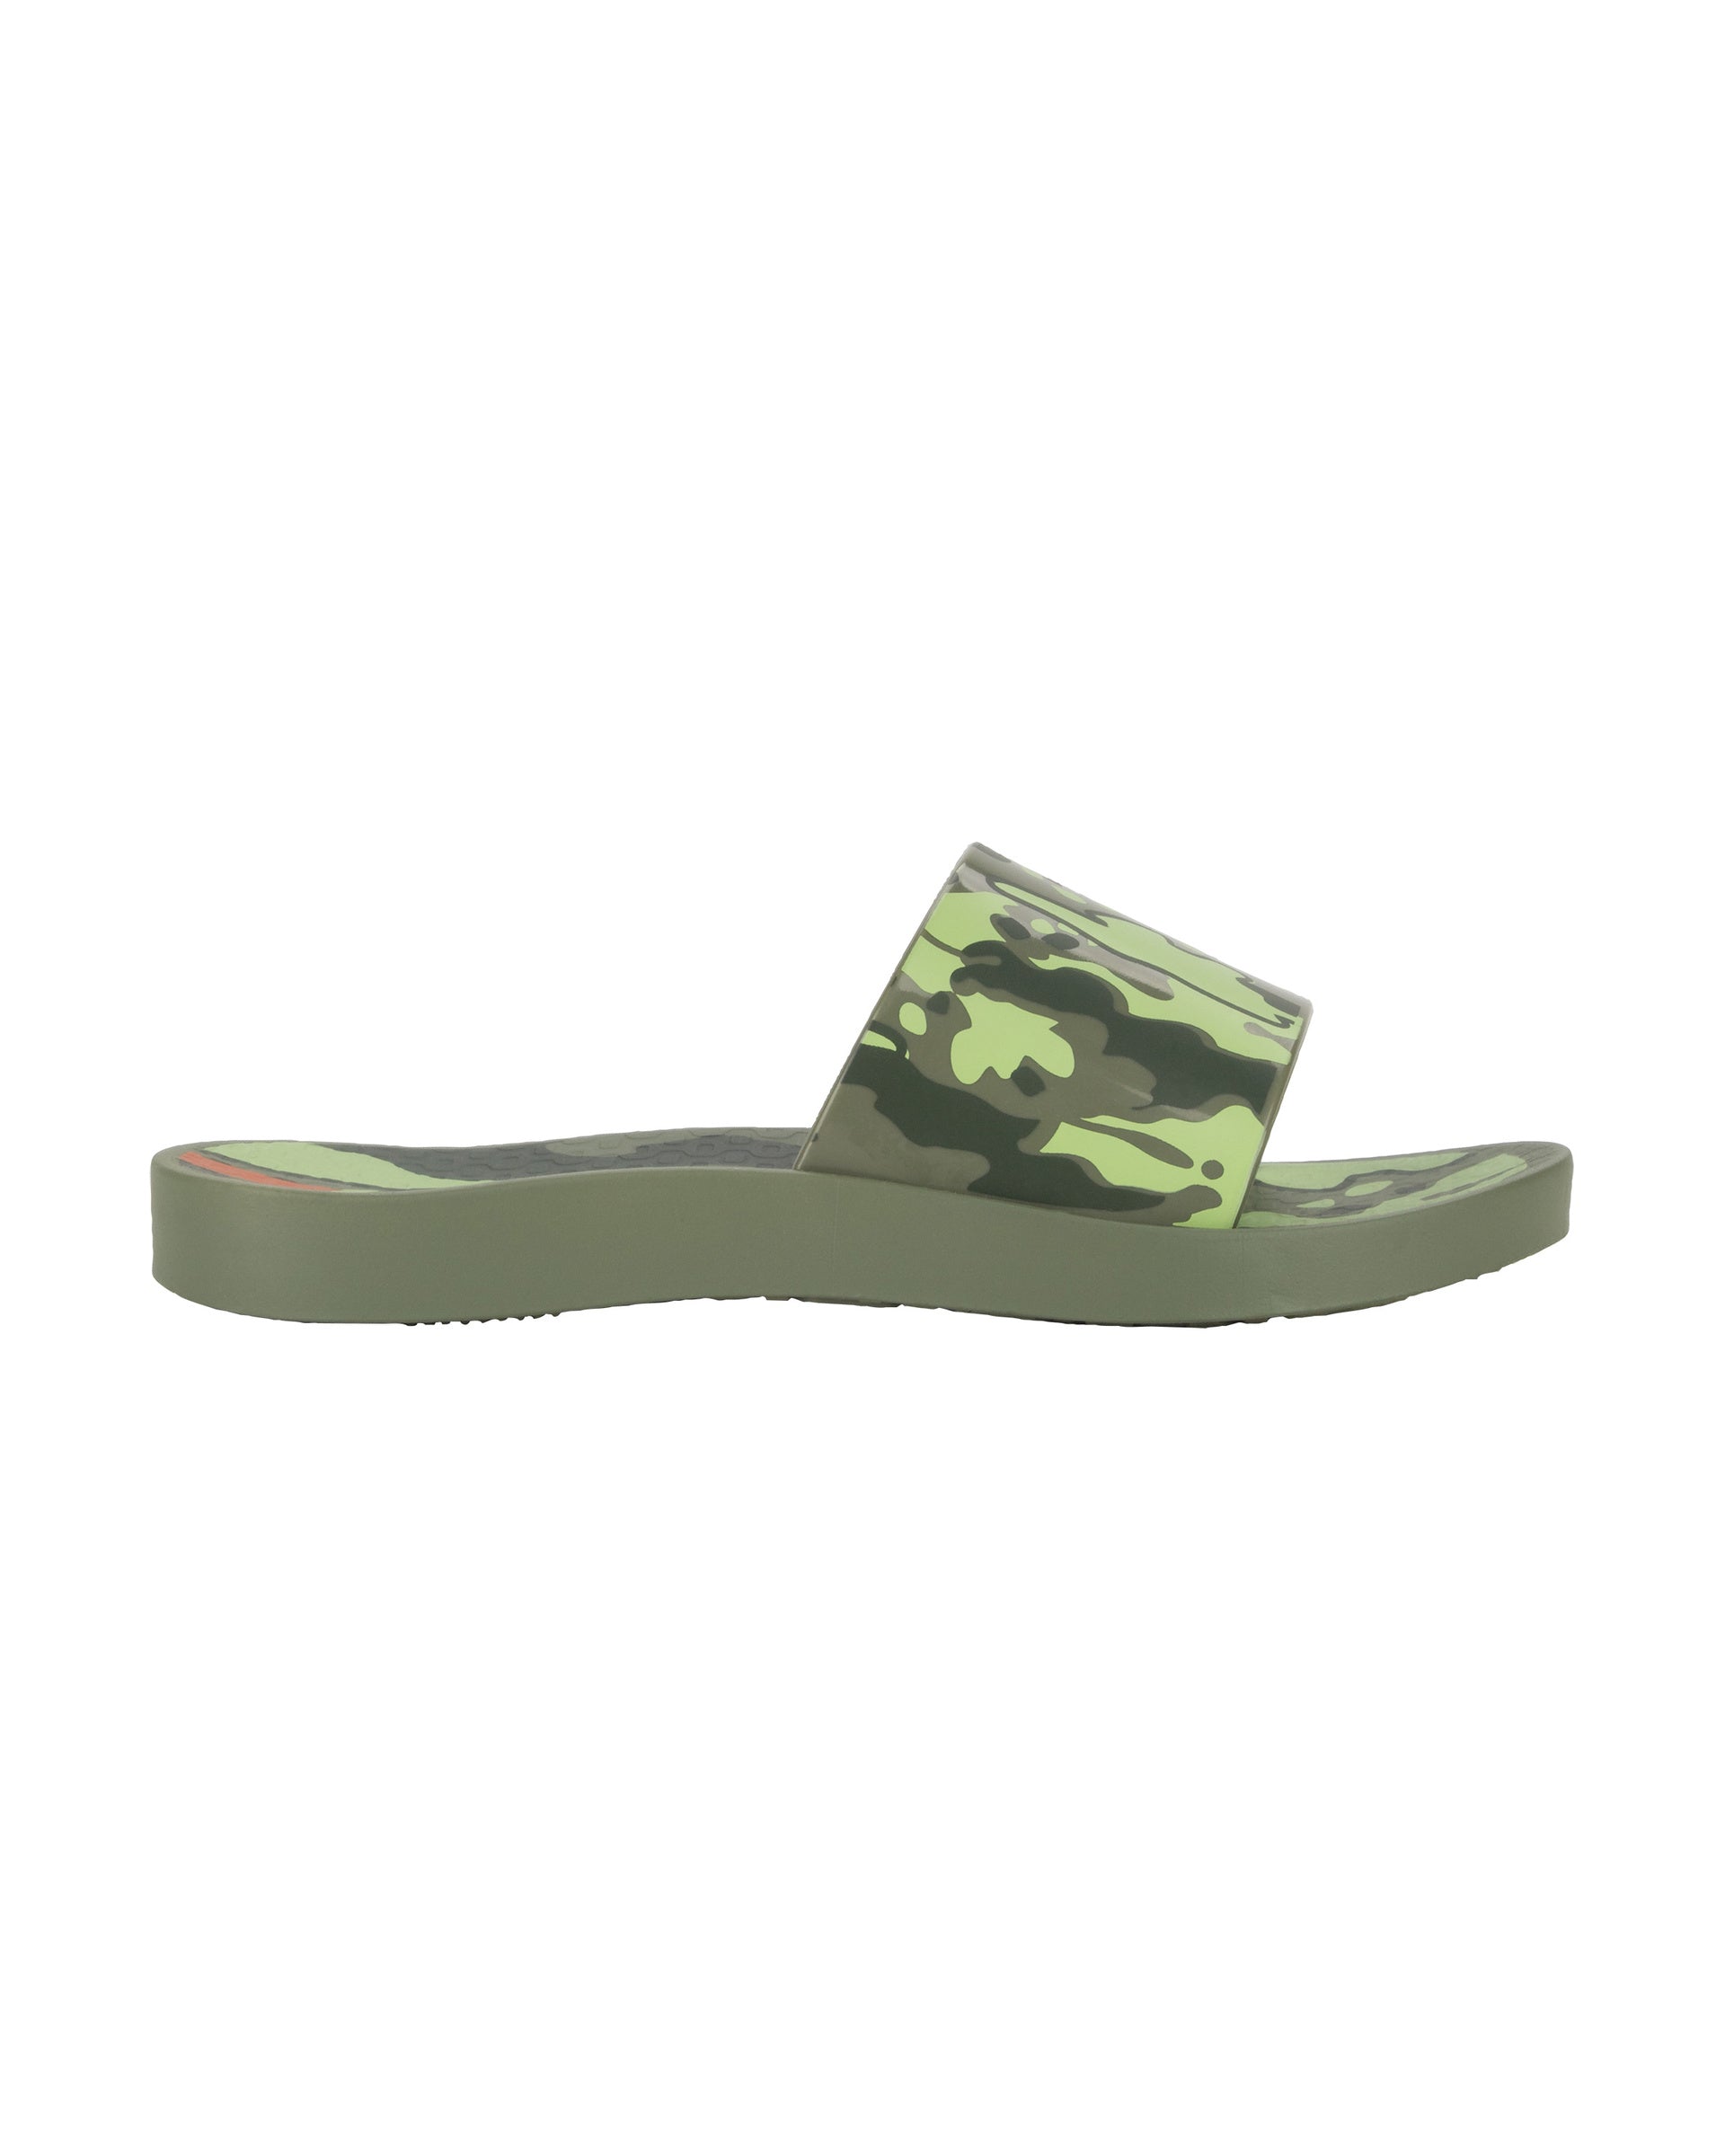 Outer side view of a green Ipanema Urban kids slide with a camo print on the upper.